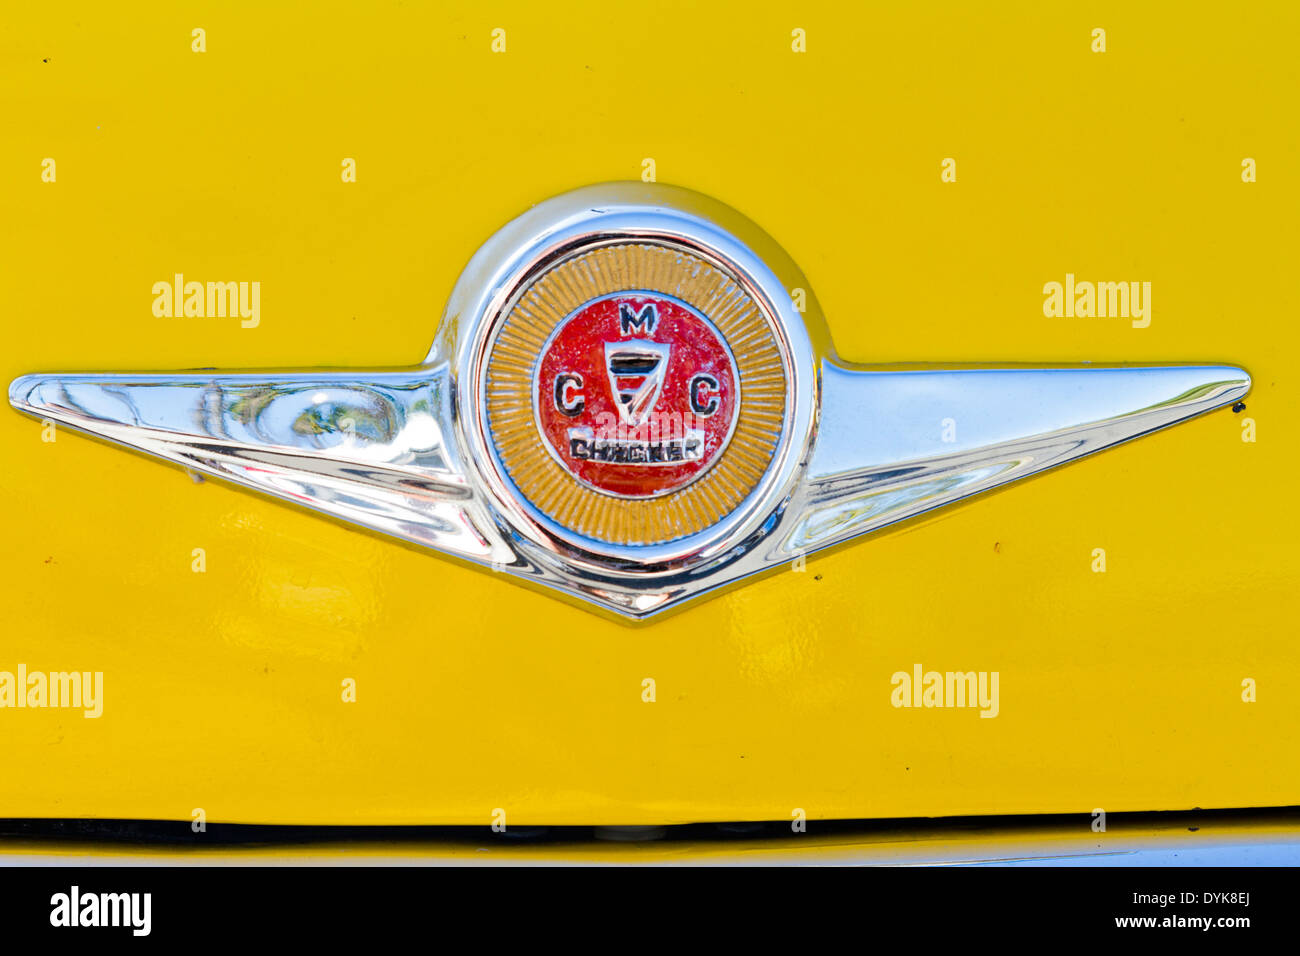 closeup-macro-picture-of-badge-on-front-of-a-yellow-1971-checker-marathon-DYK8EJ.jpg